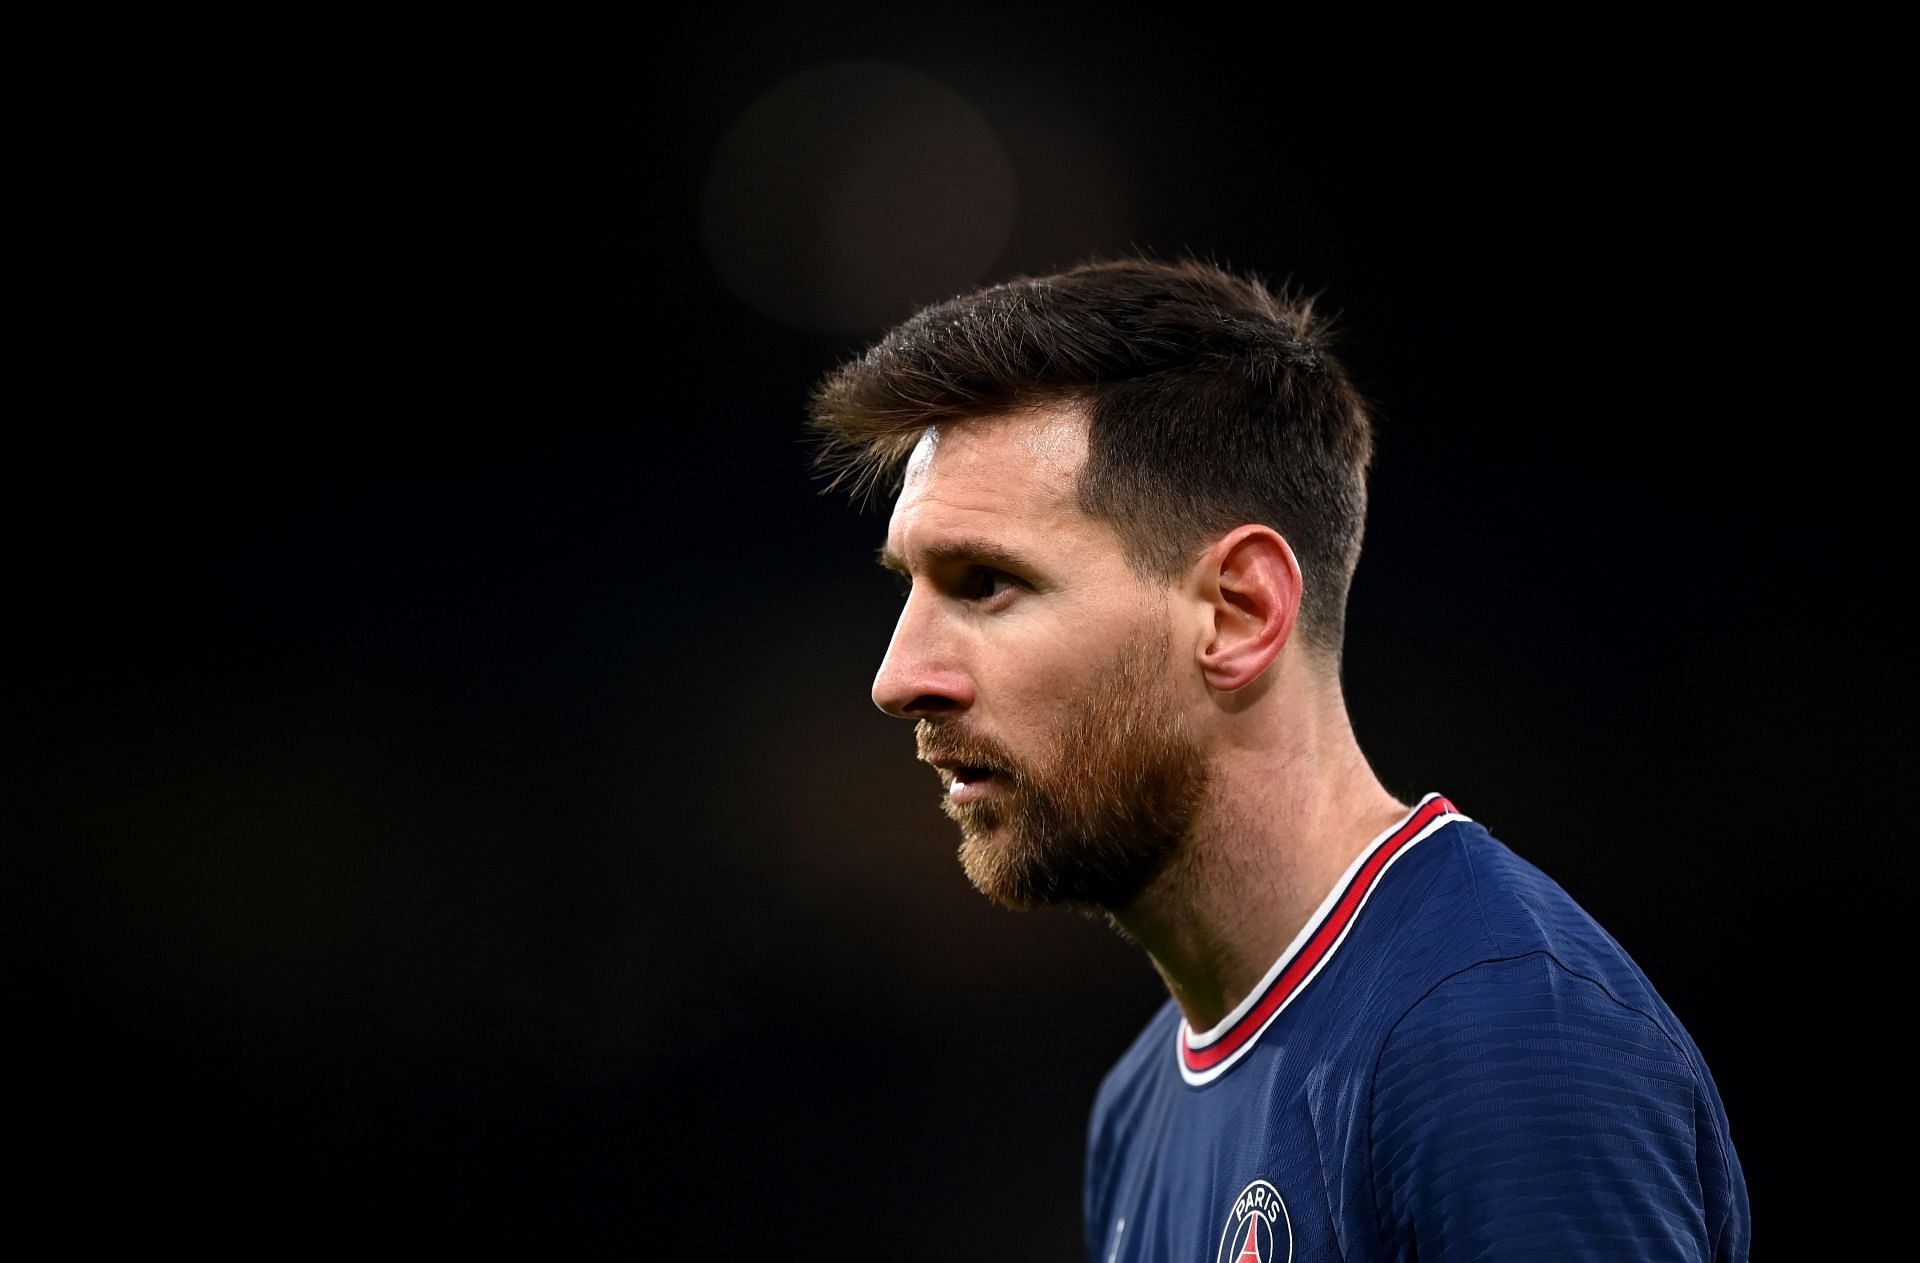 Lionel Messi is finding his feet in France (Photo by Shaun Botterill/Getty Images)